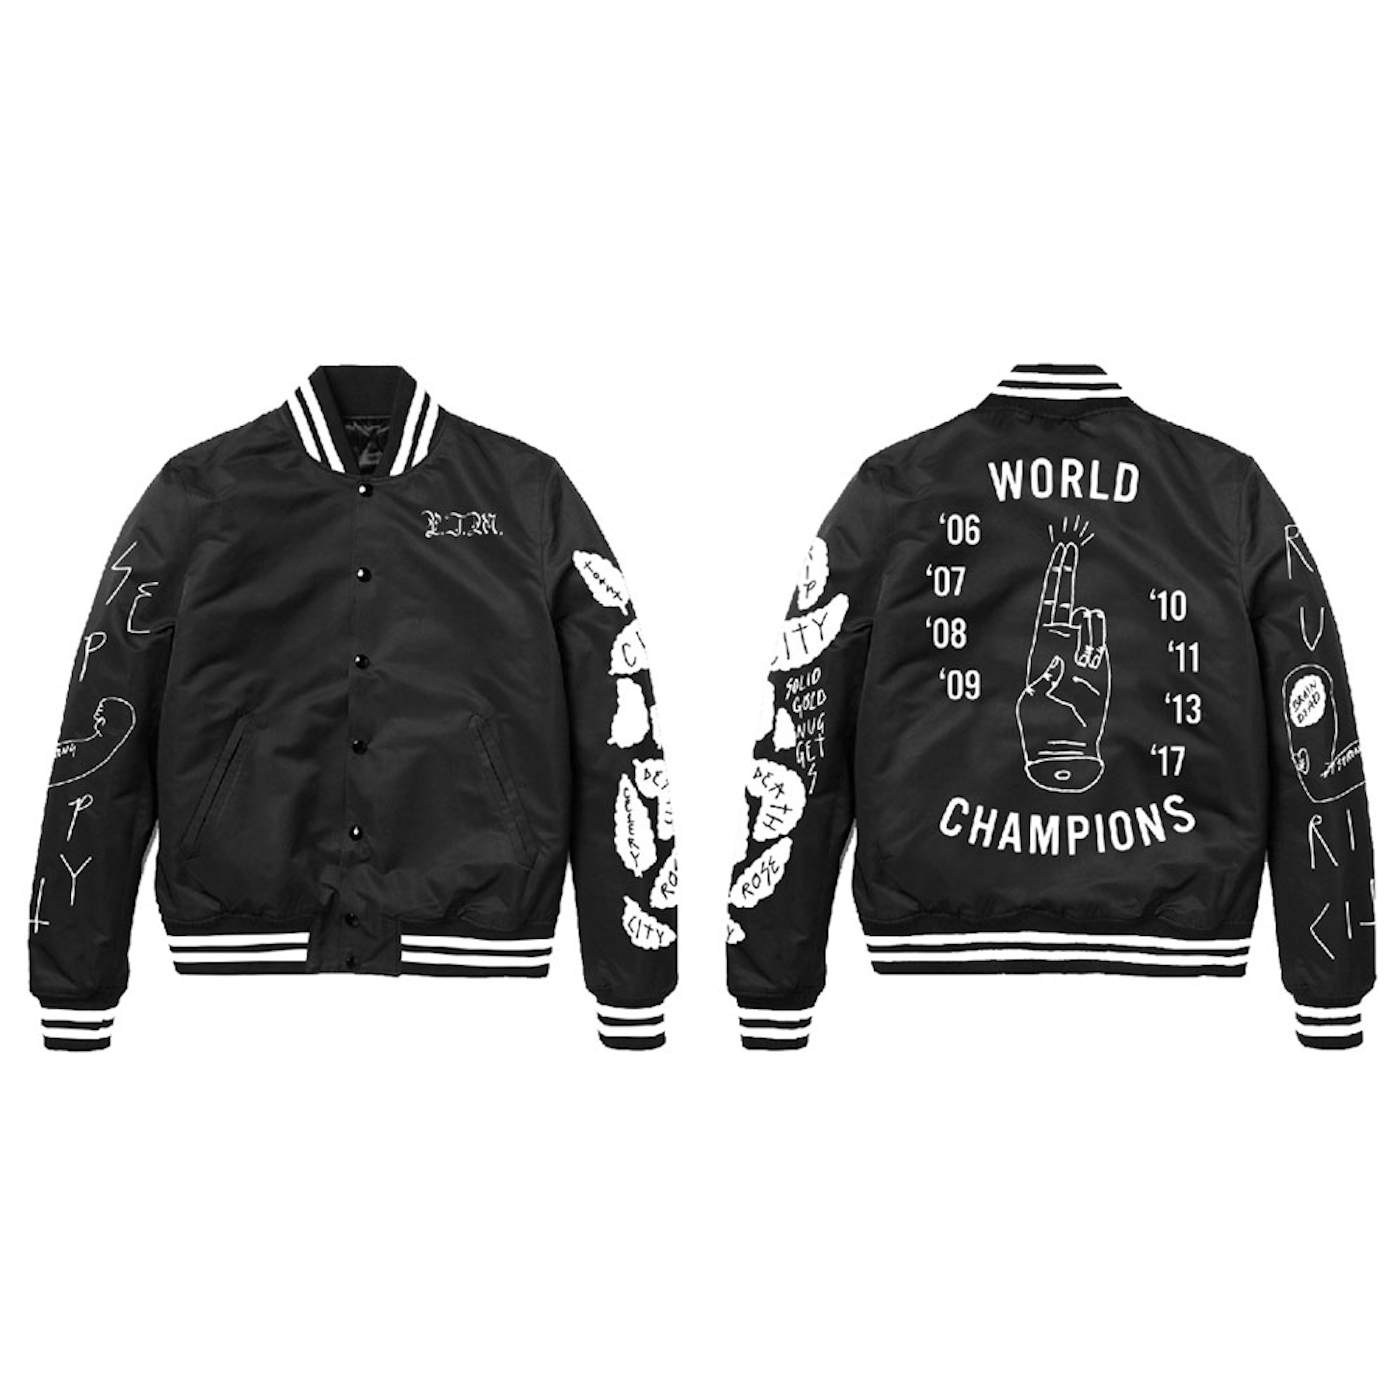 Portugal. The Man World Champs Jacket